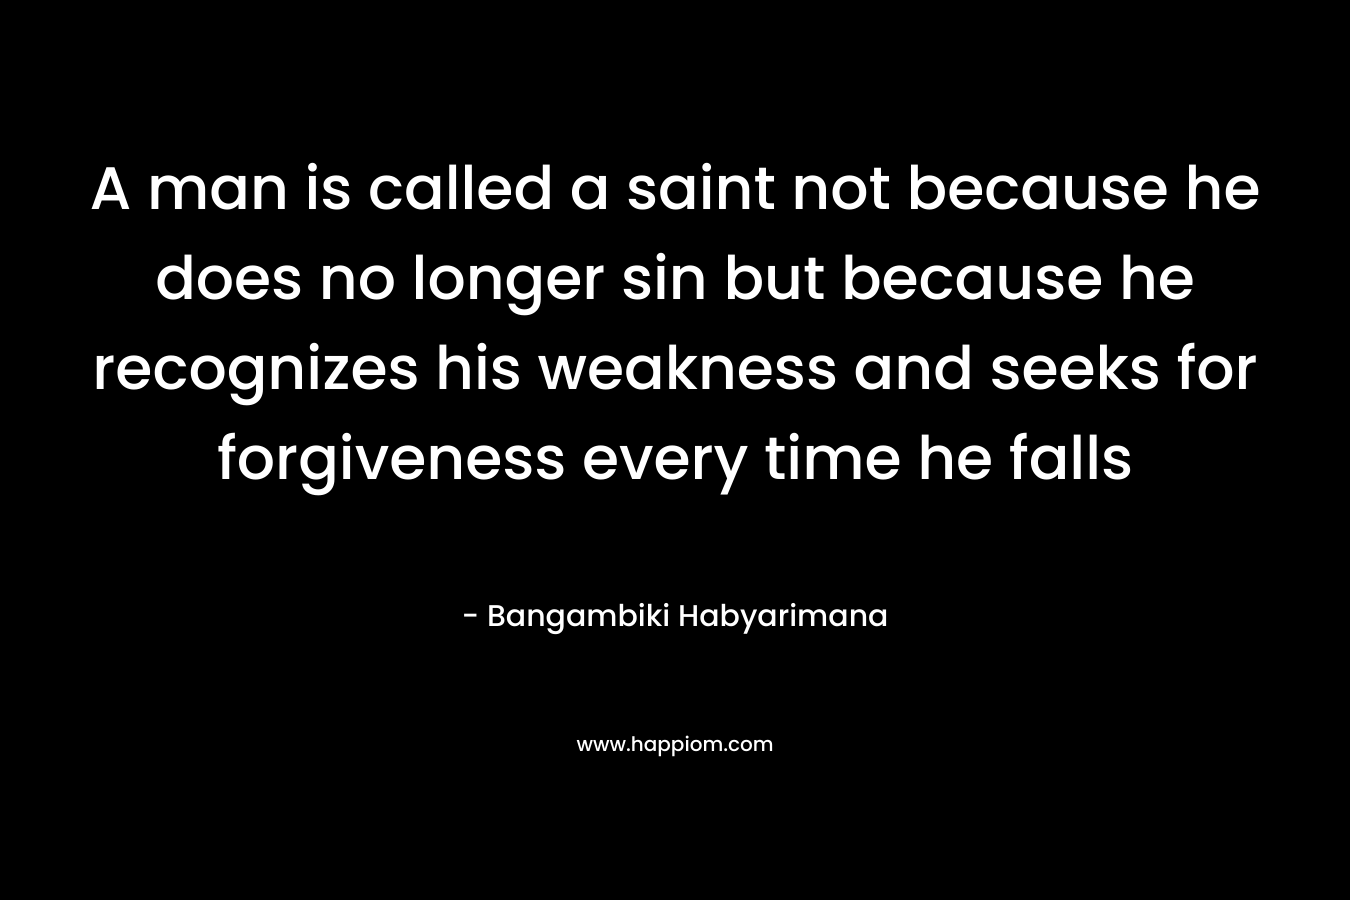 A man is called a saint not because he does no longer sin but because he recognizes his weakness and seeks for forgiveness every time he falls